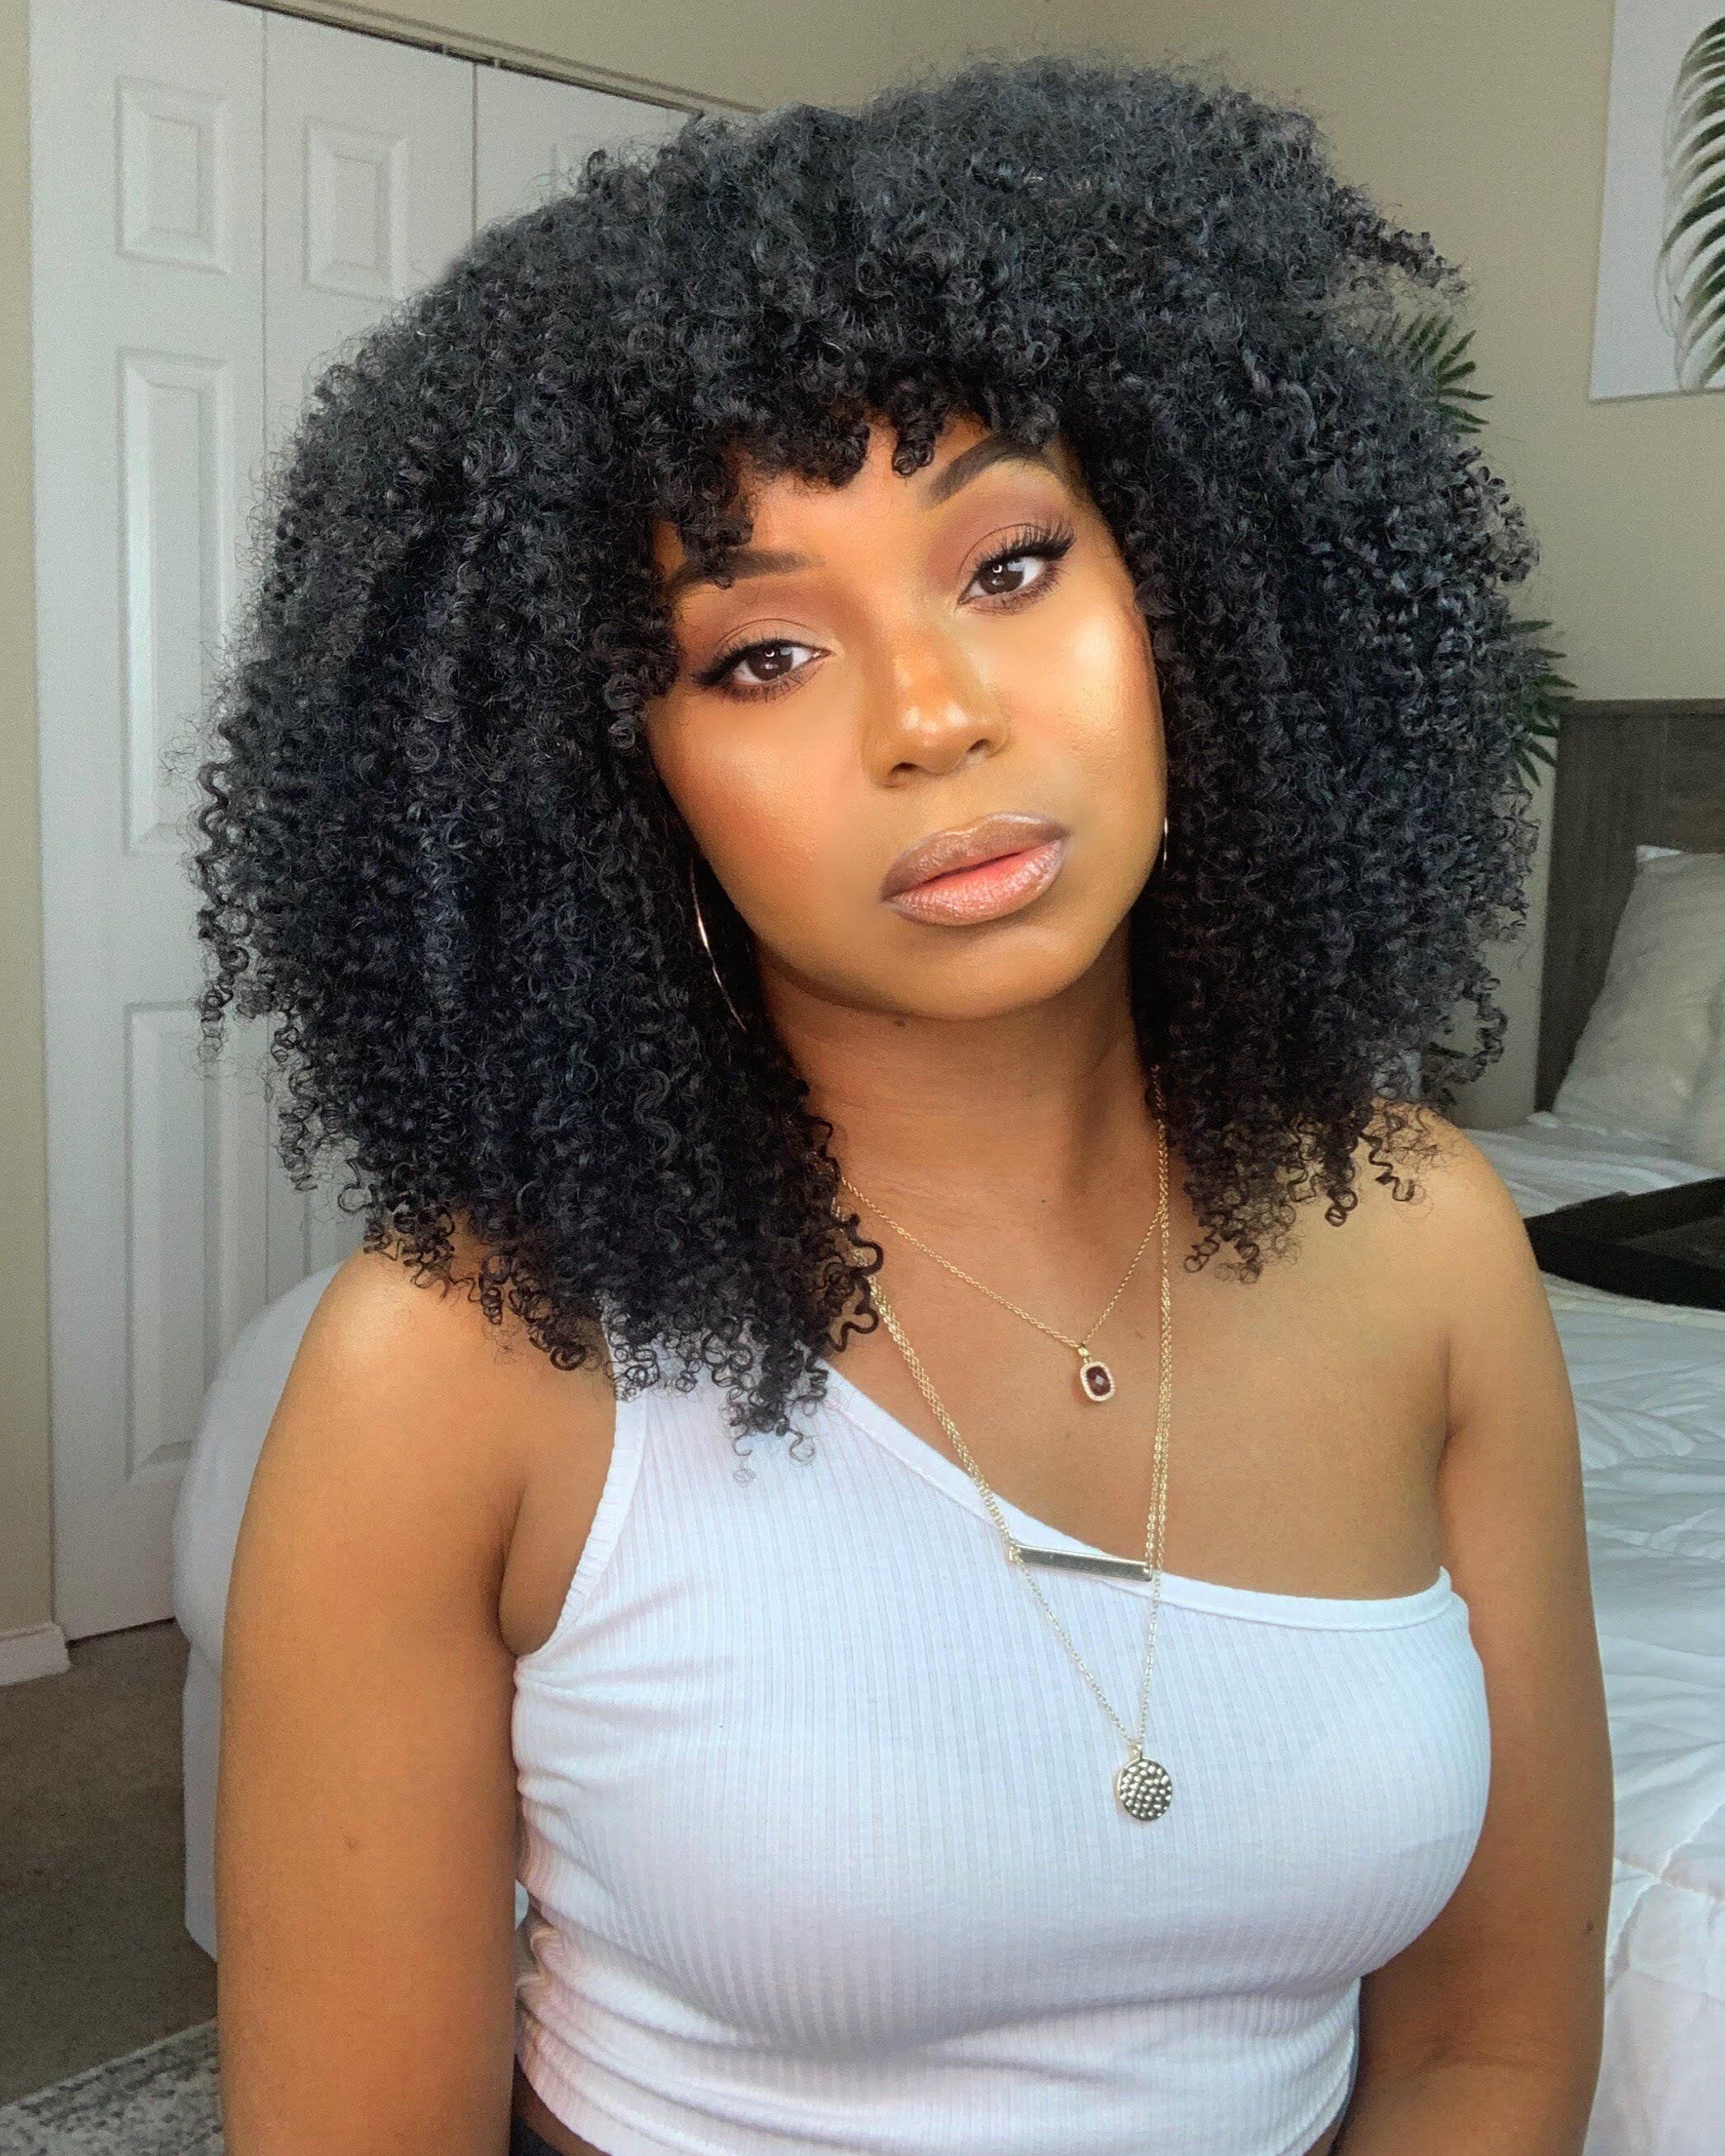 Black Short Curly Afro Wigs With Bangs for Black Women Kinky Curly Hair Wig  | eBay